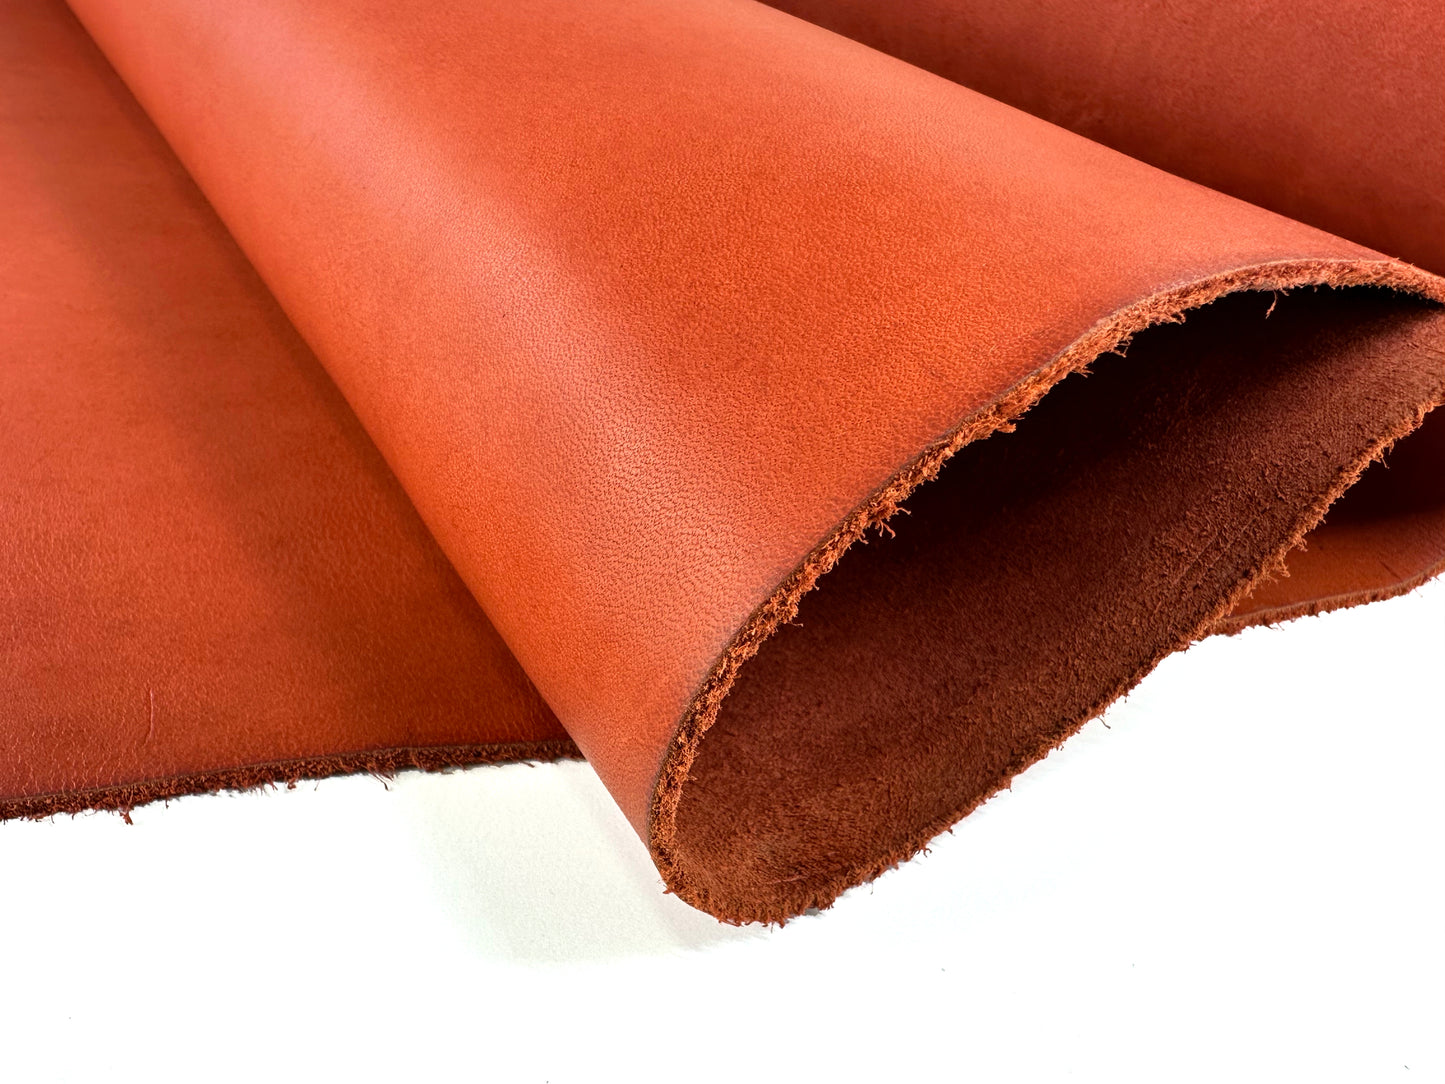 [Limited stock] Novose #8 Terracotta Hand Waxed Leather